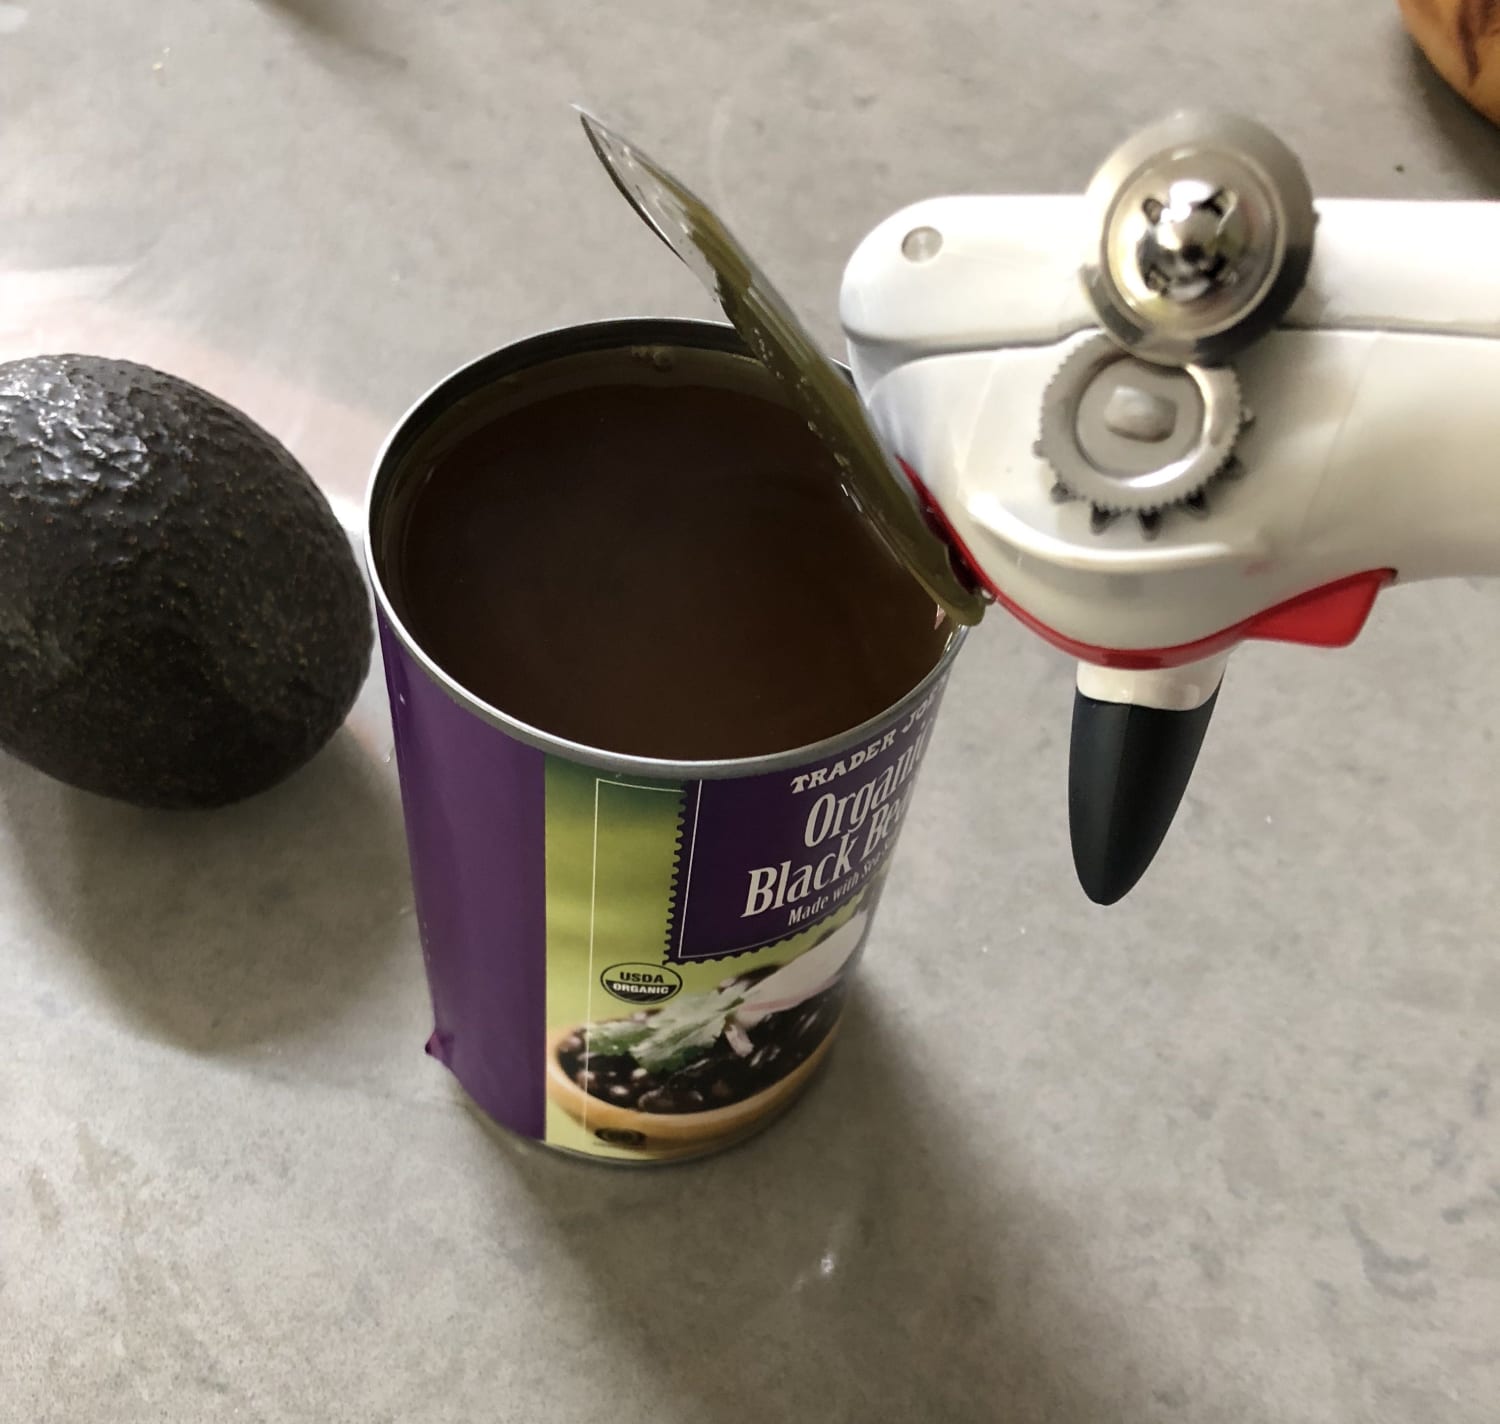 How To Open A Can Without A Can Opener